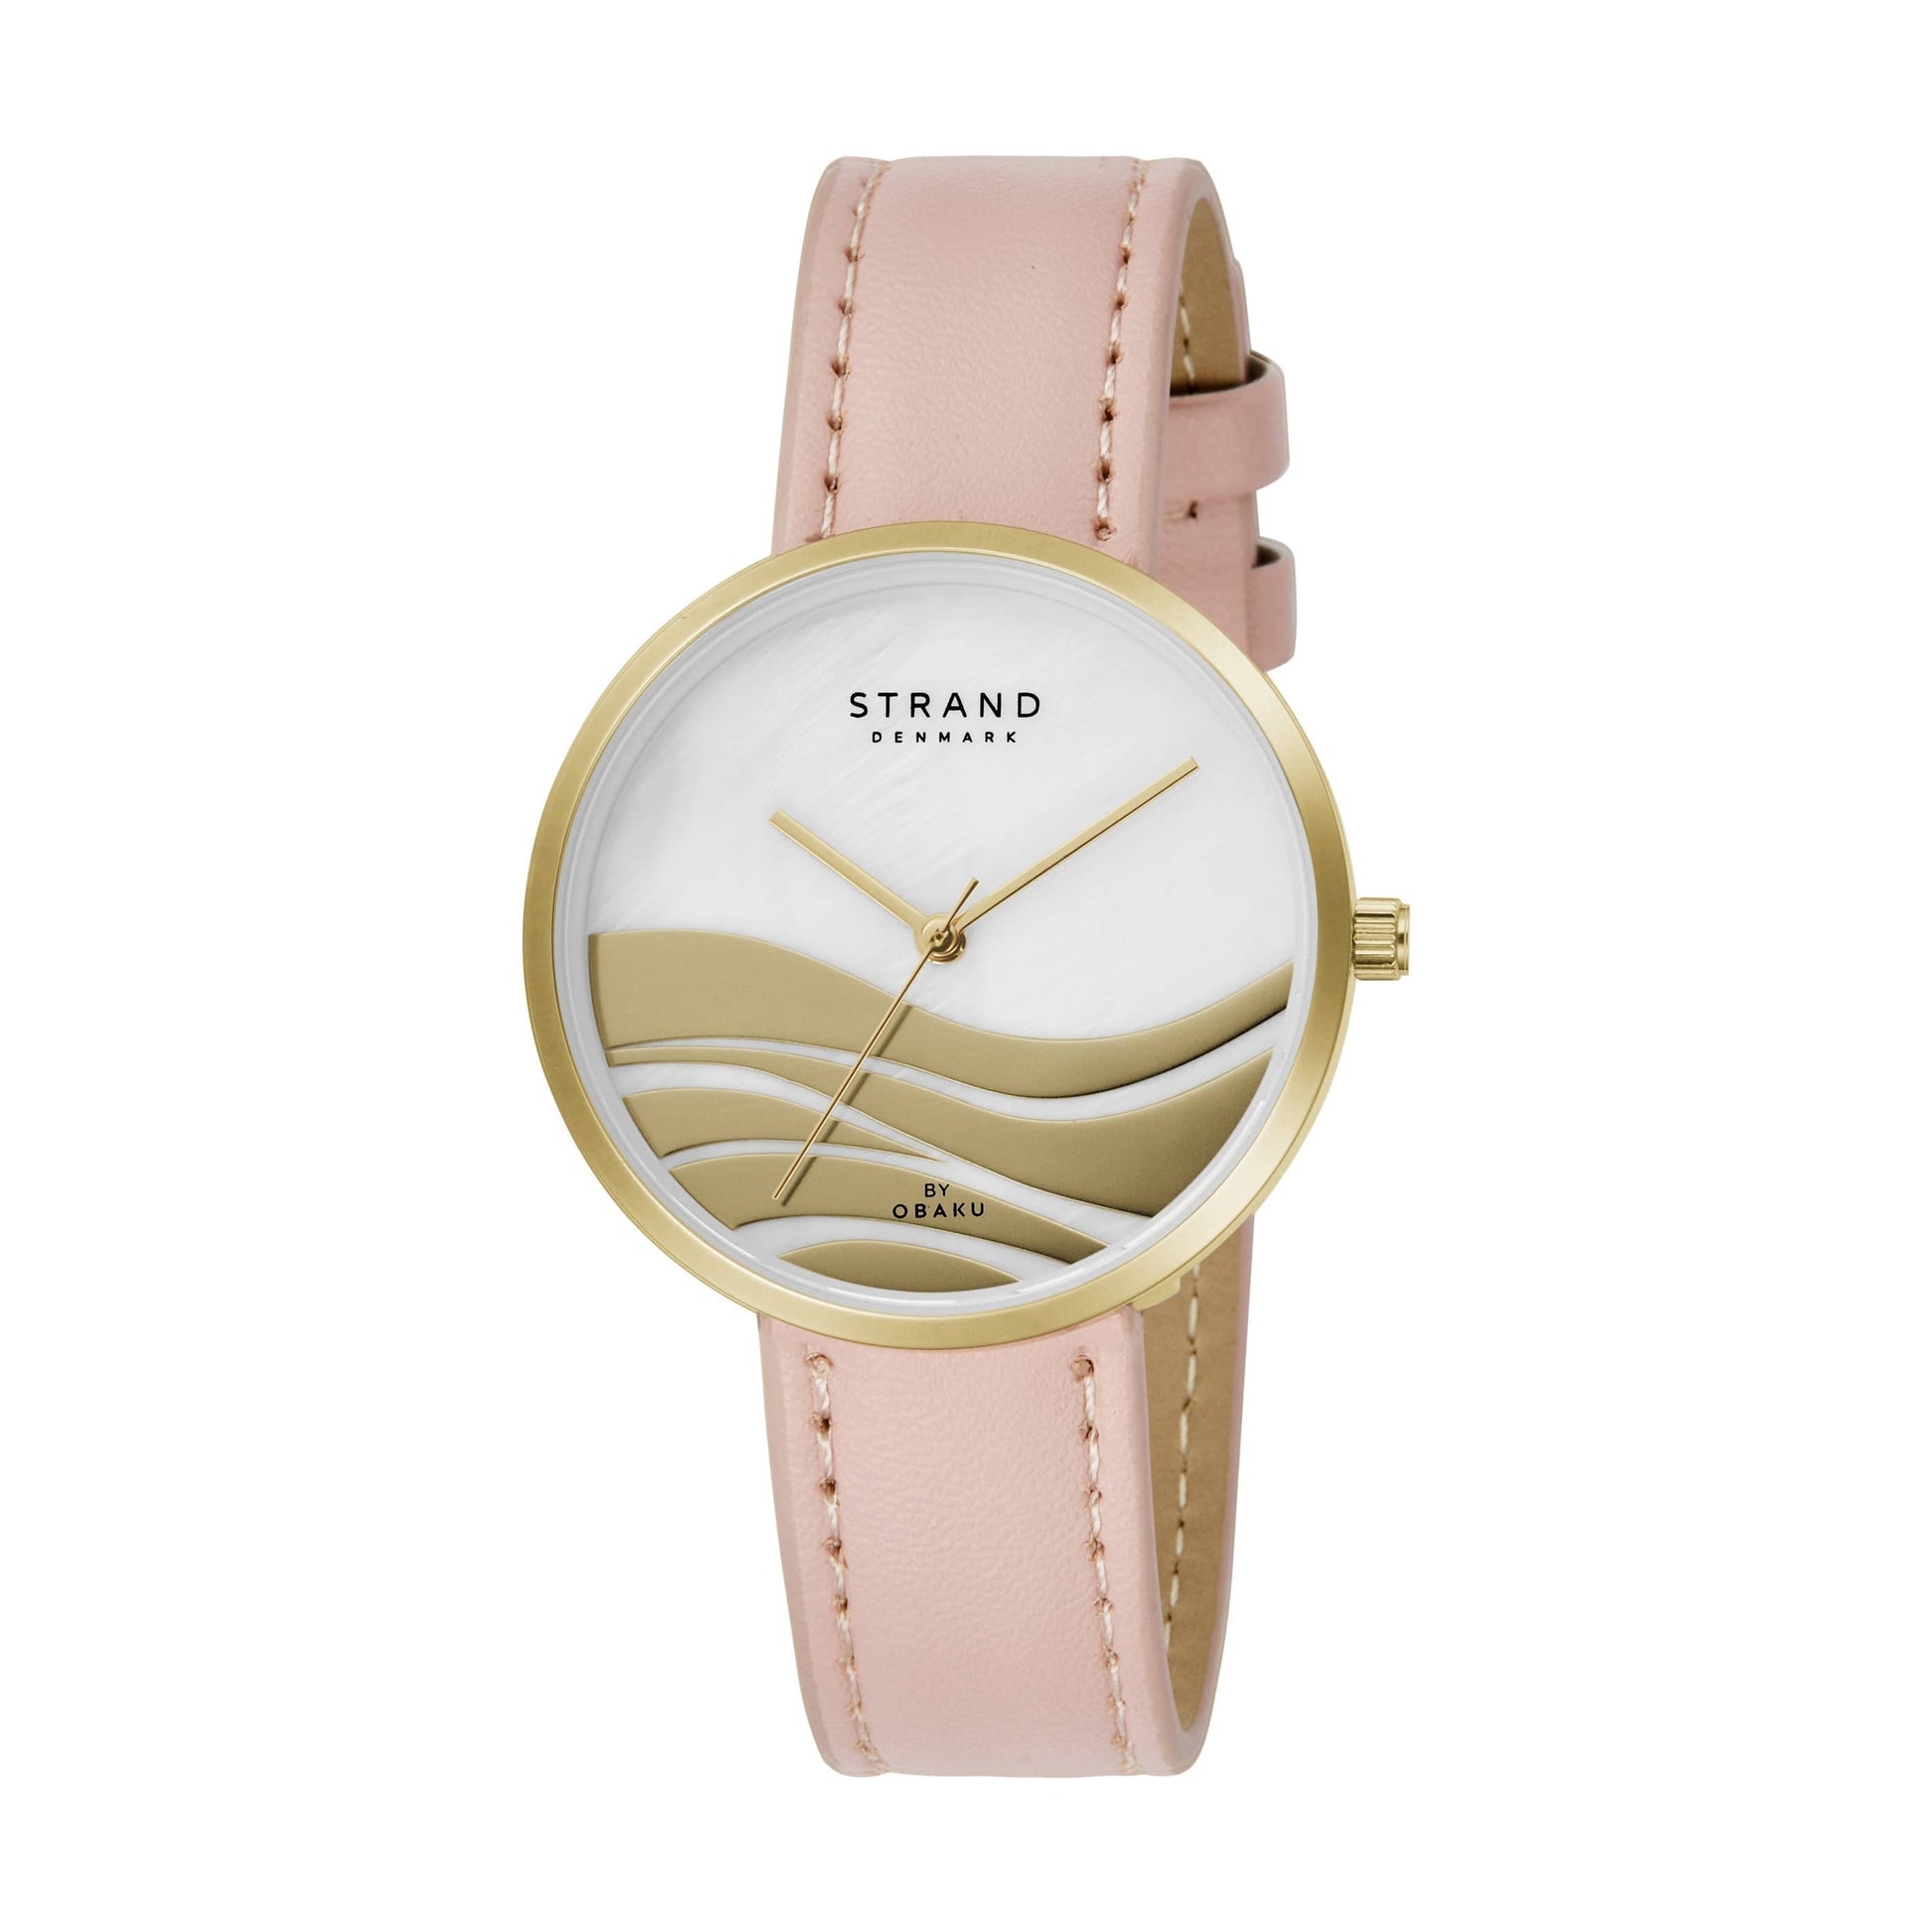 Gold Ocean waves watch with MOP dial & pink leather strap - MinutesHoursDays